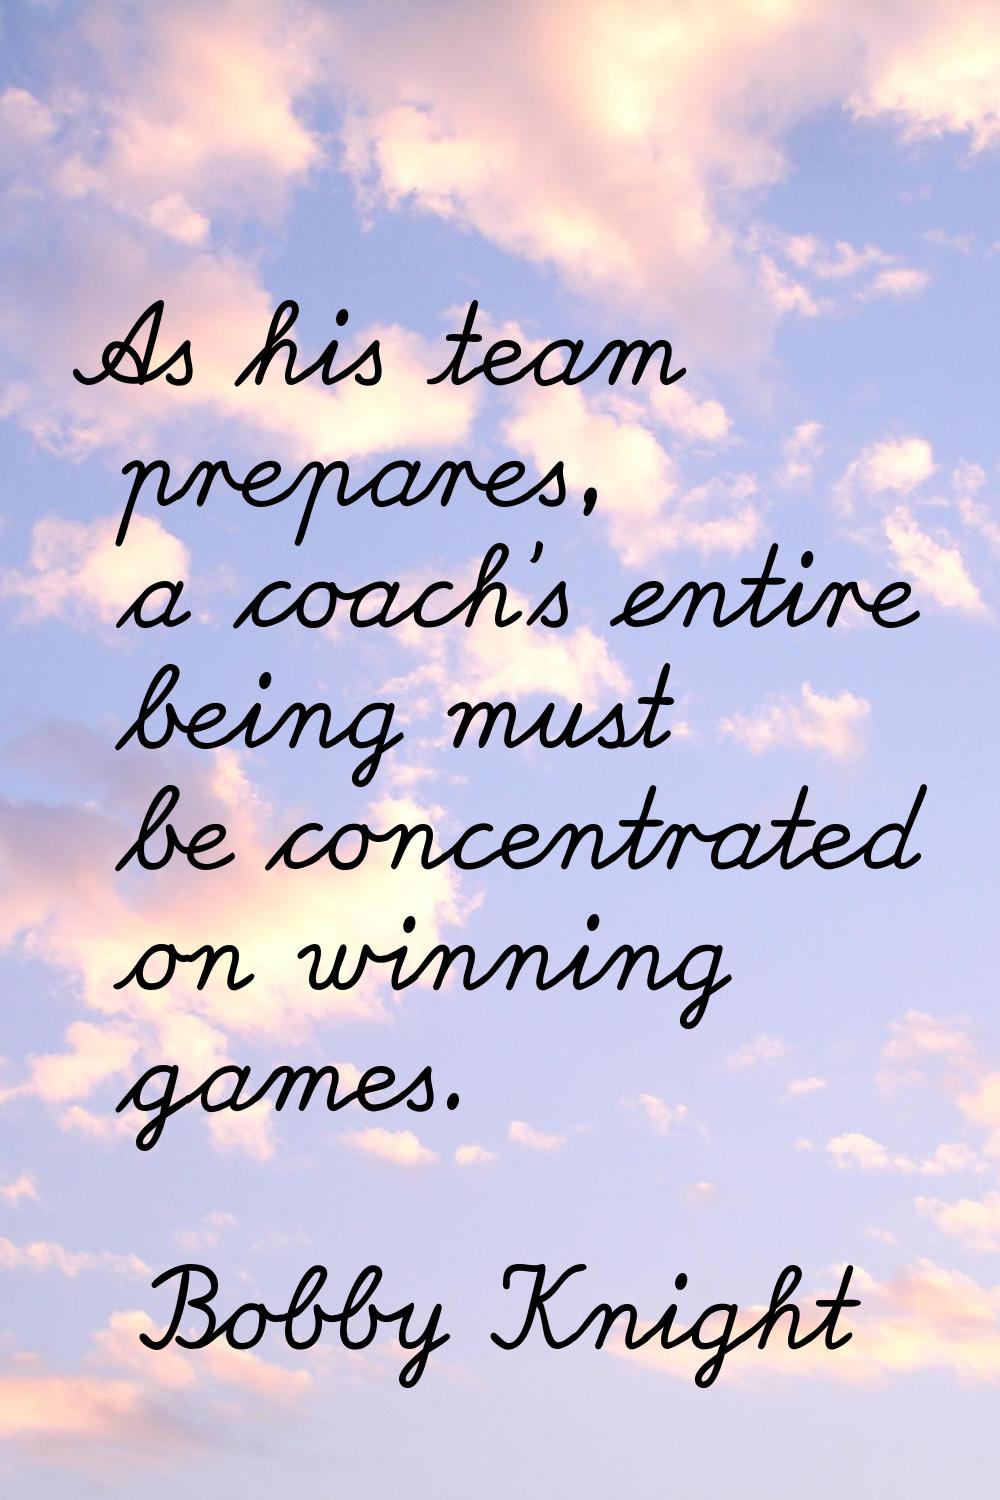 As his team prepares, a coach's entire being must be concentrated on winning games.